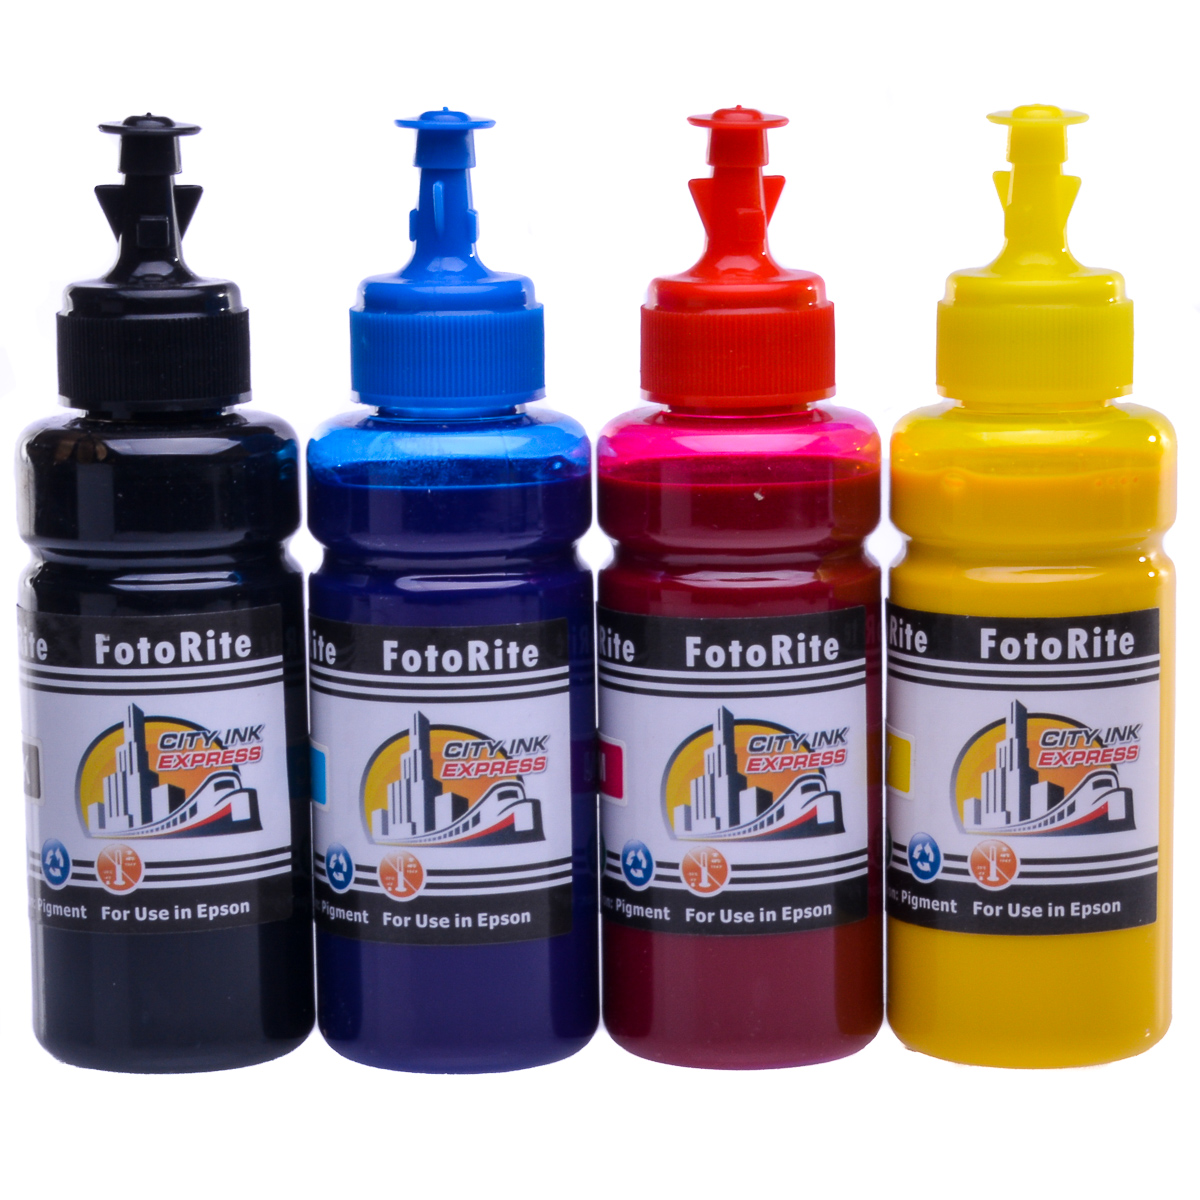 Cheap Multipack pigment ink refill replaces Epson WF-4740DWF